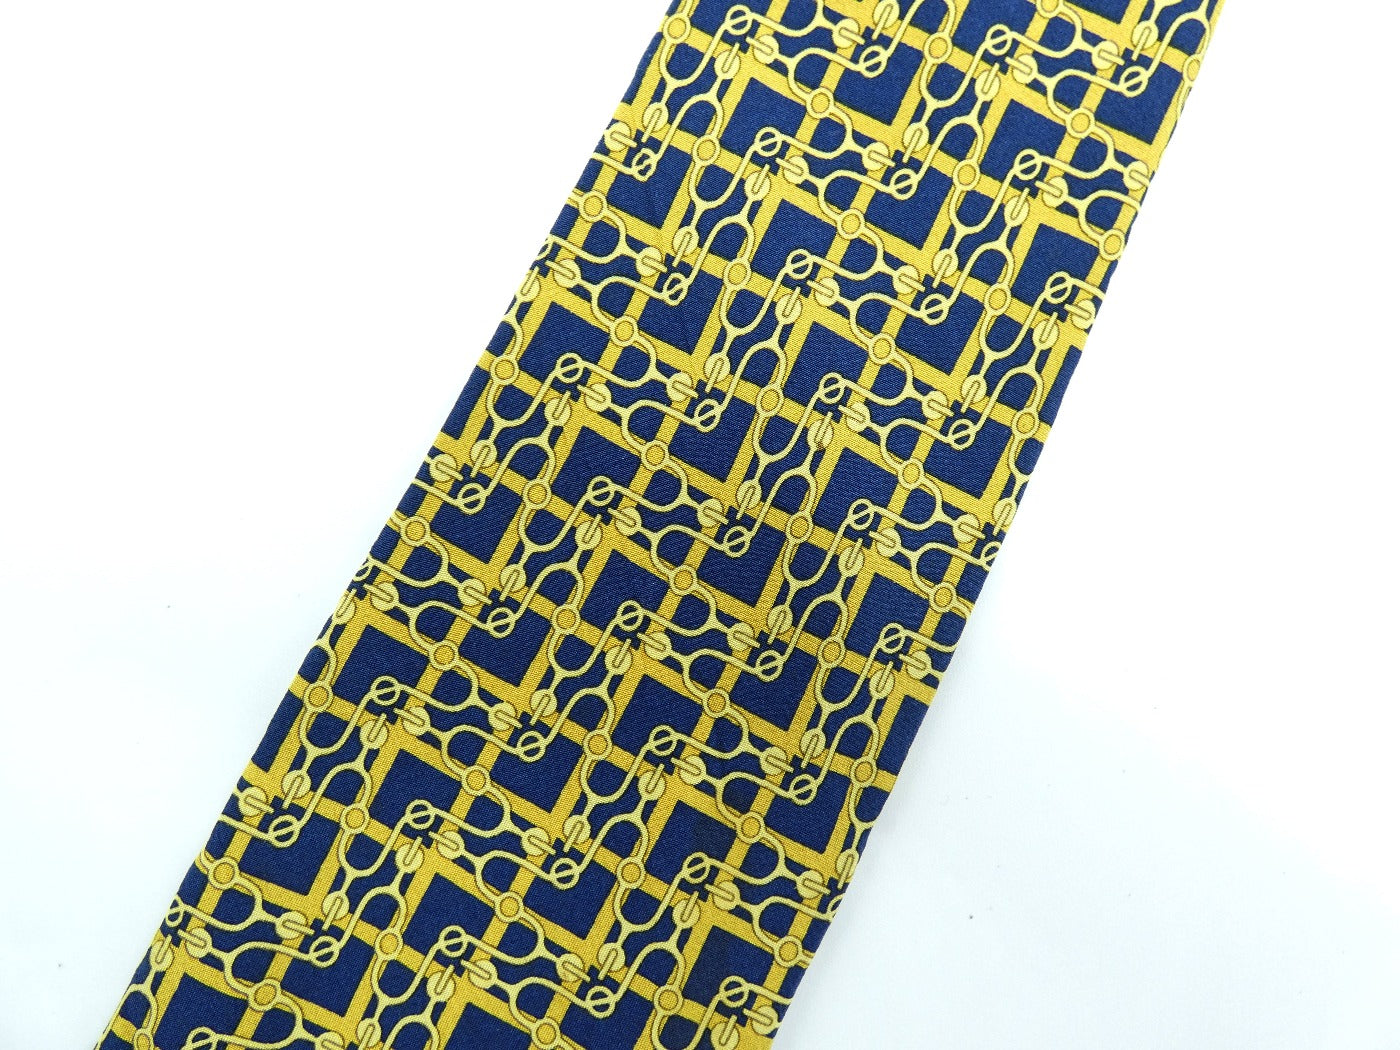 Hermès Blue and Gold Abstract Graphic Silk Tie Ties Hermès